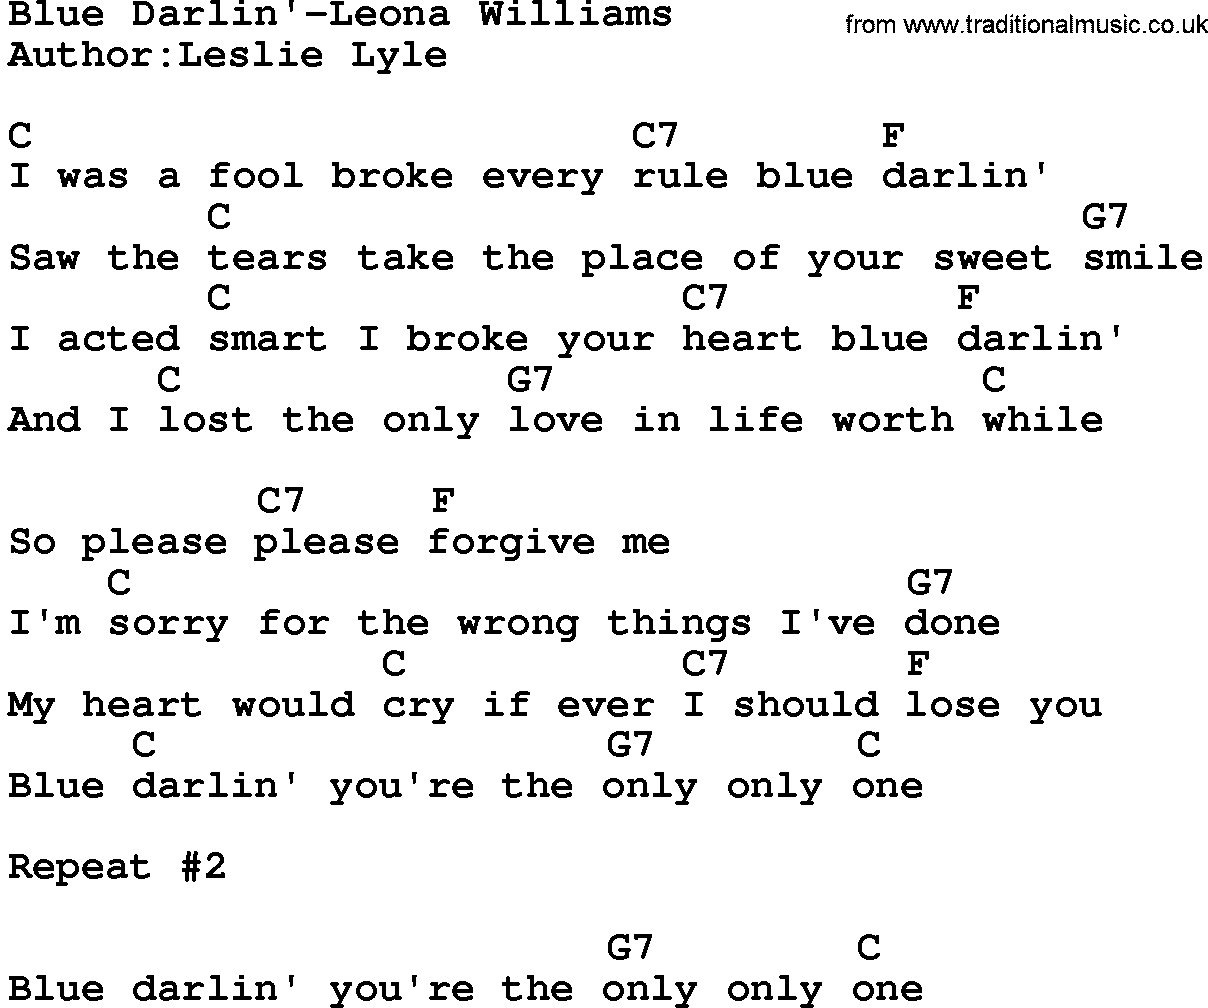 Country music song: Blue Darlin'-Leona Williams lyrics and chords